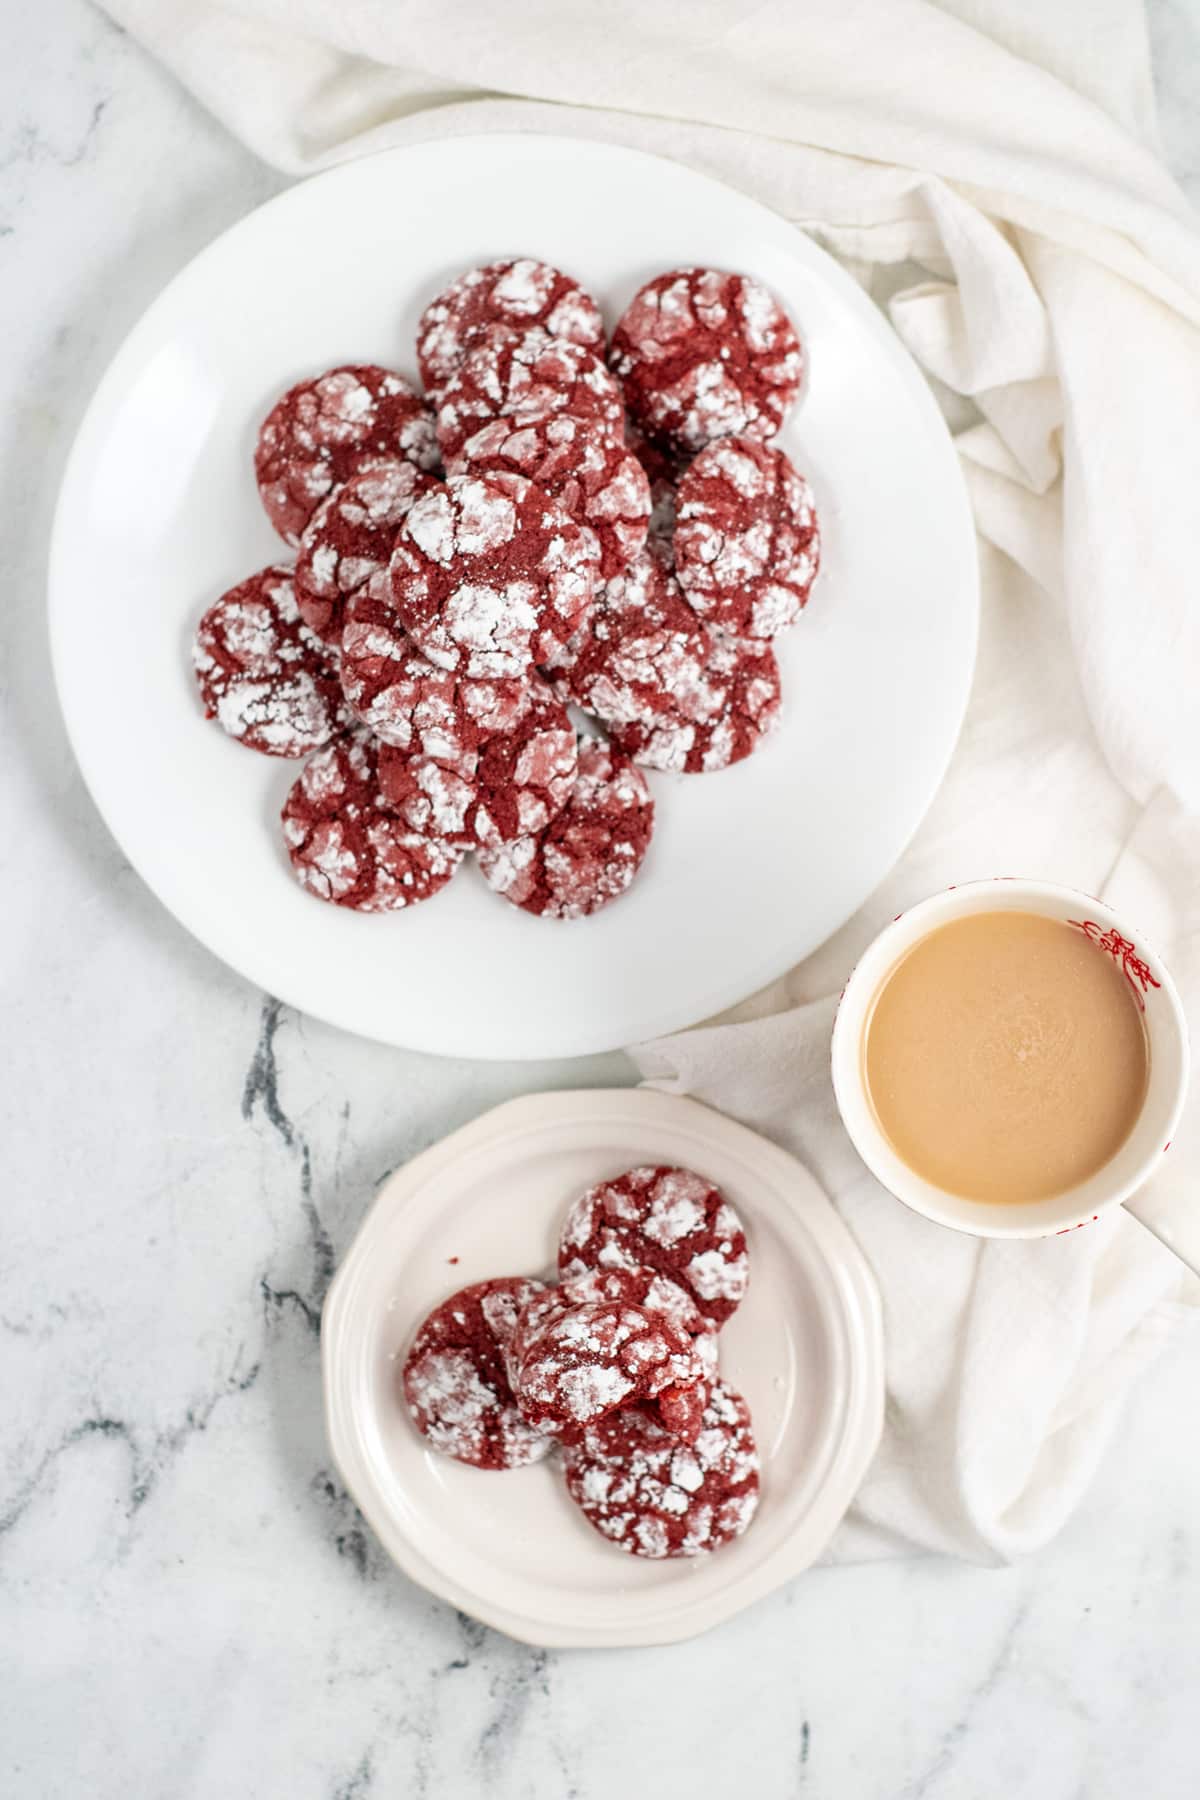 A mouthwatering red velvet crinkle cookie served with coffee.